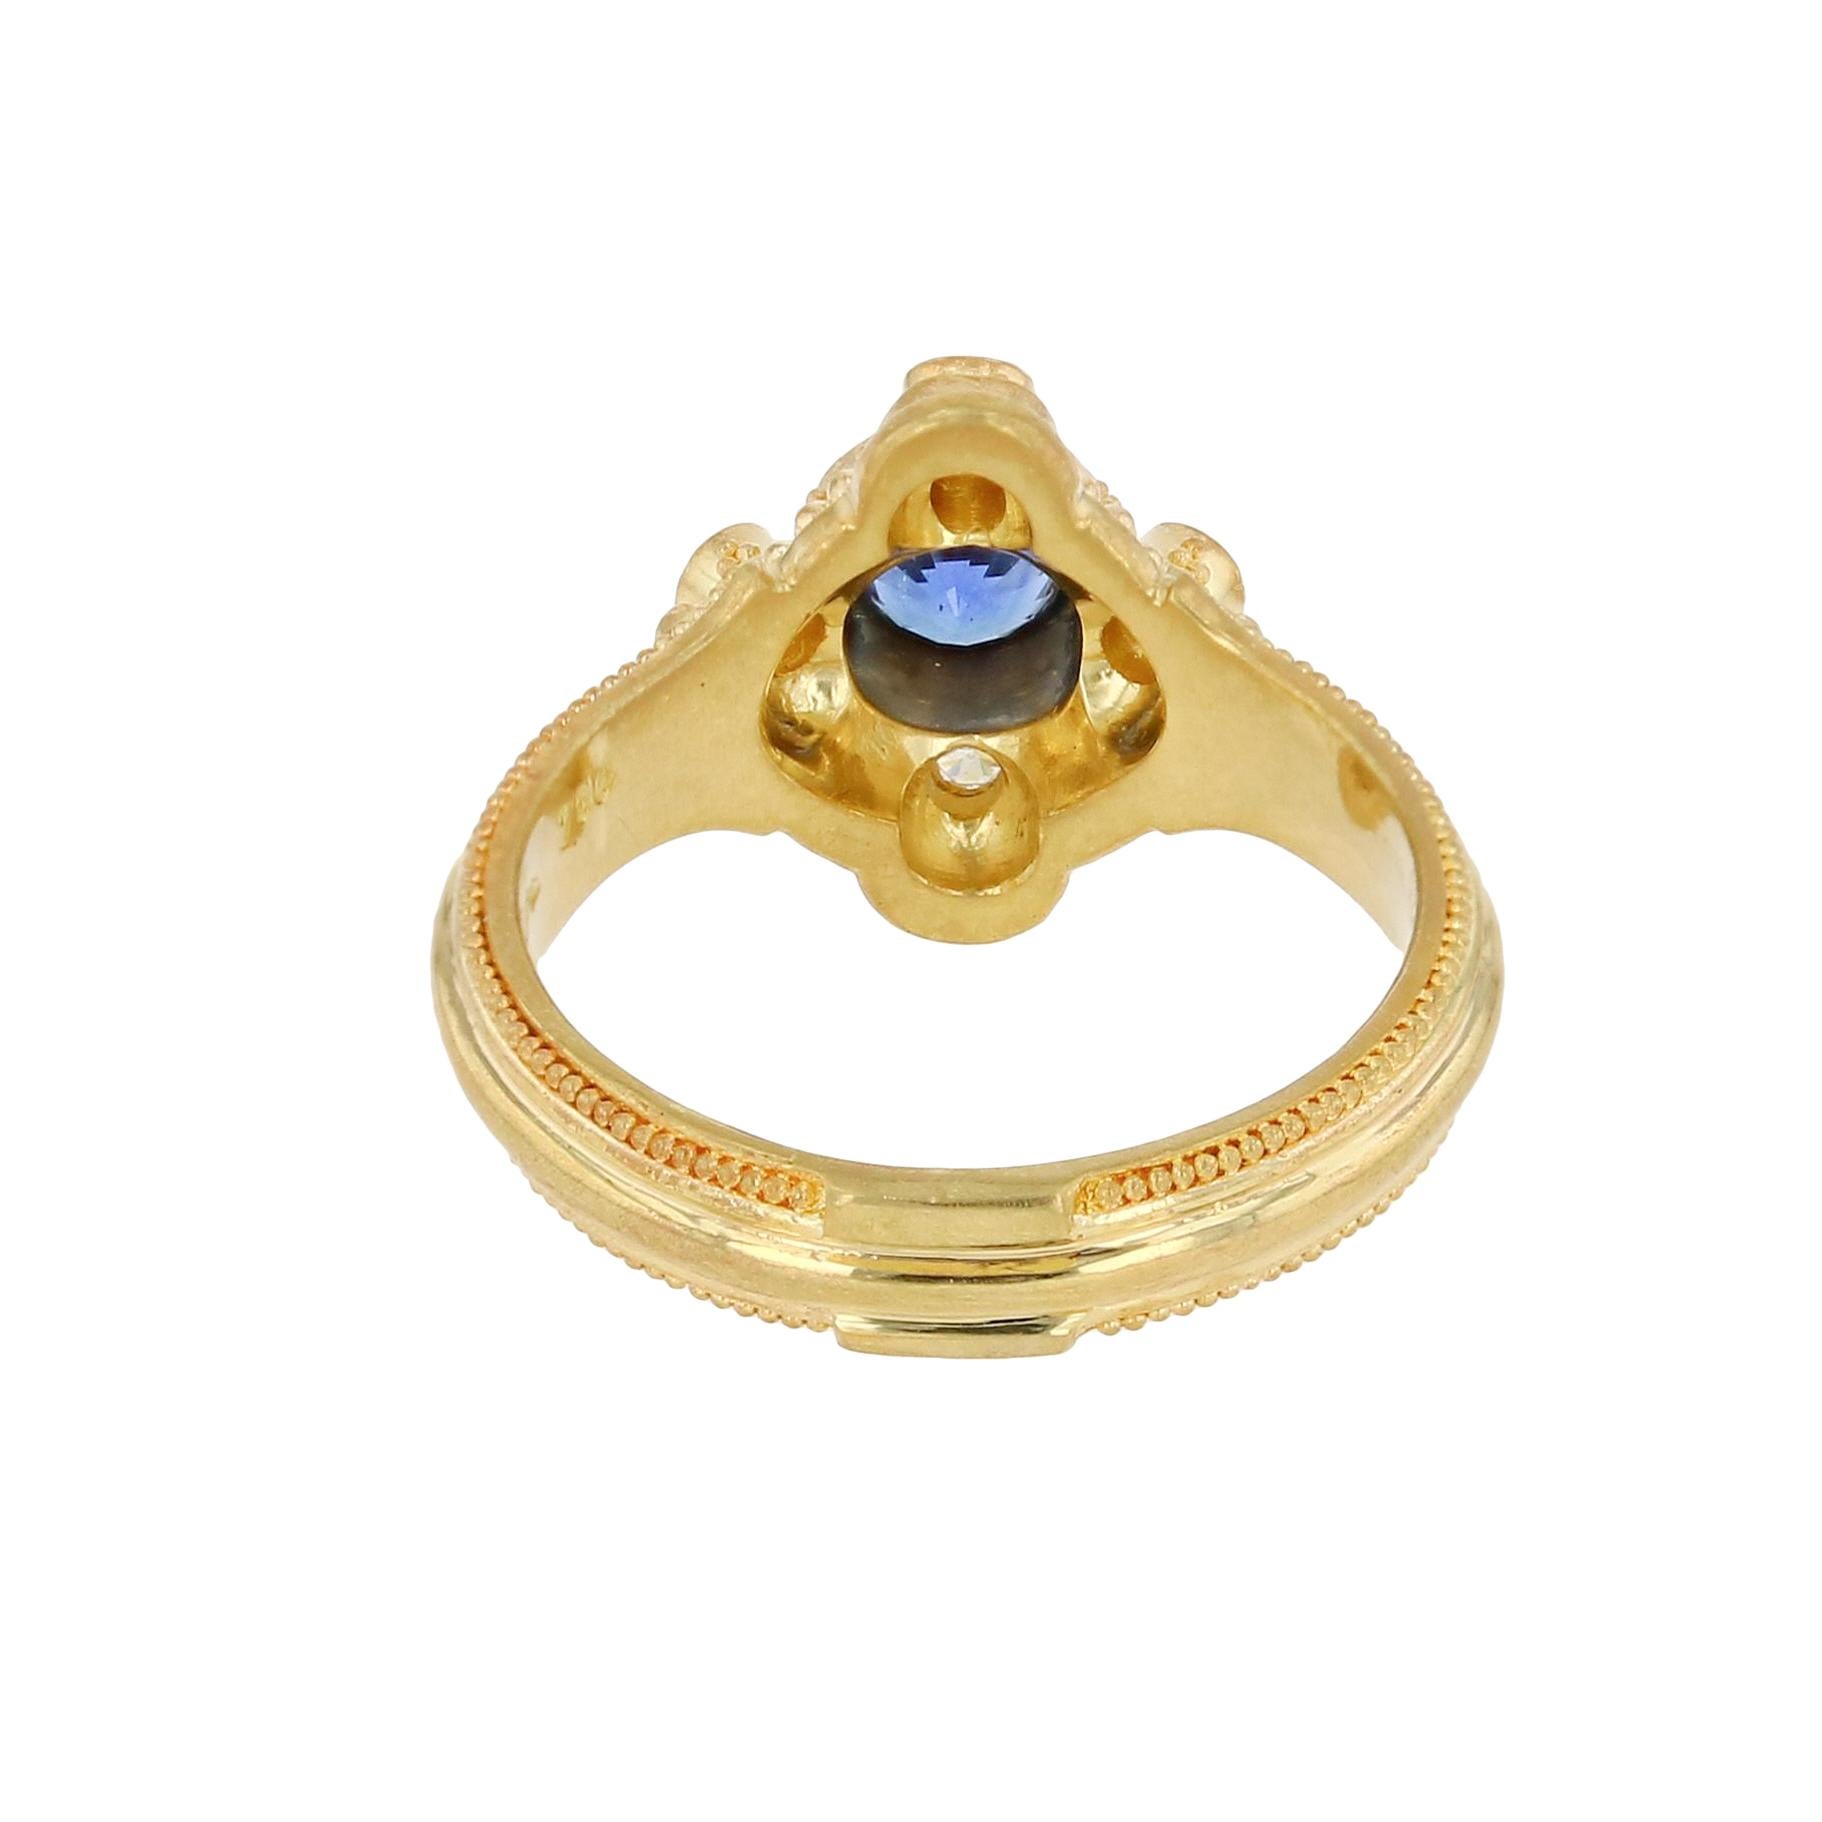 Kent Raible 18 Karat Gold Blue Sapphire and Diamond Ring with Fine Granulation In New Condition For Sale In Mossrock, WA